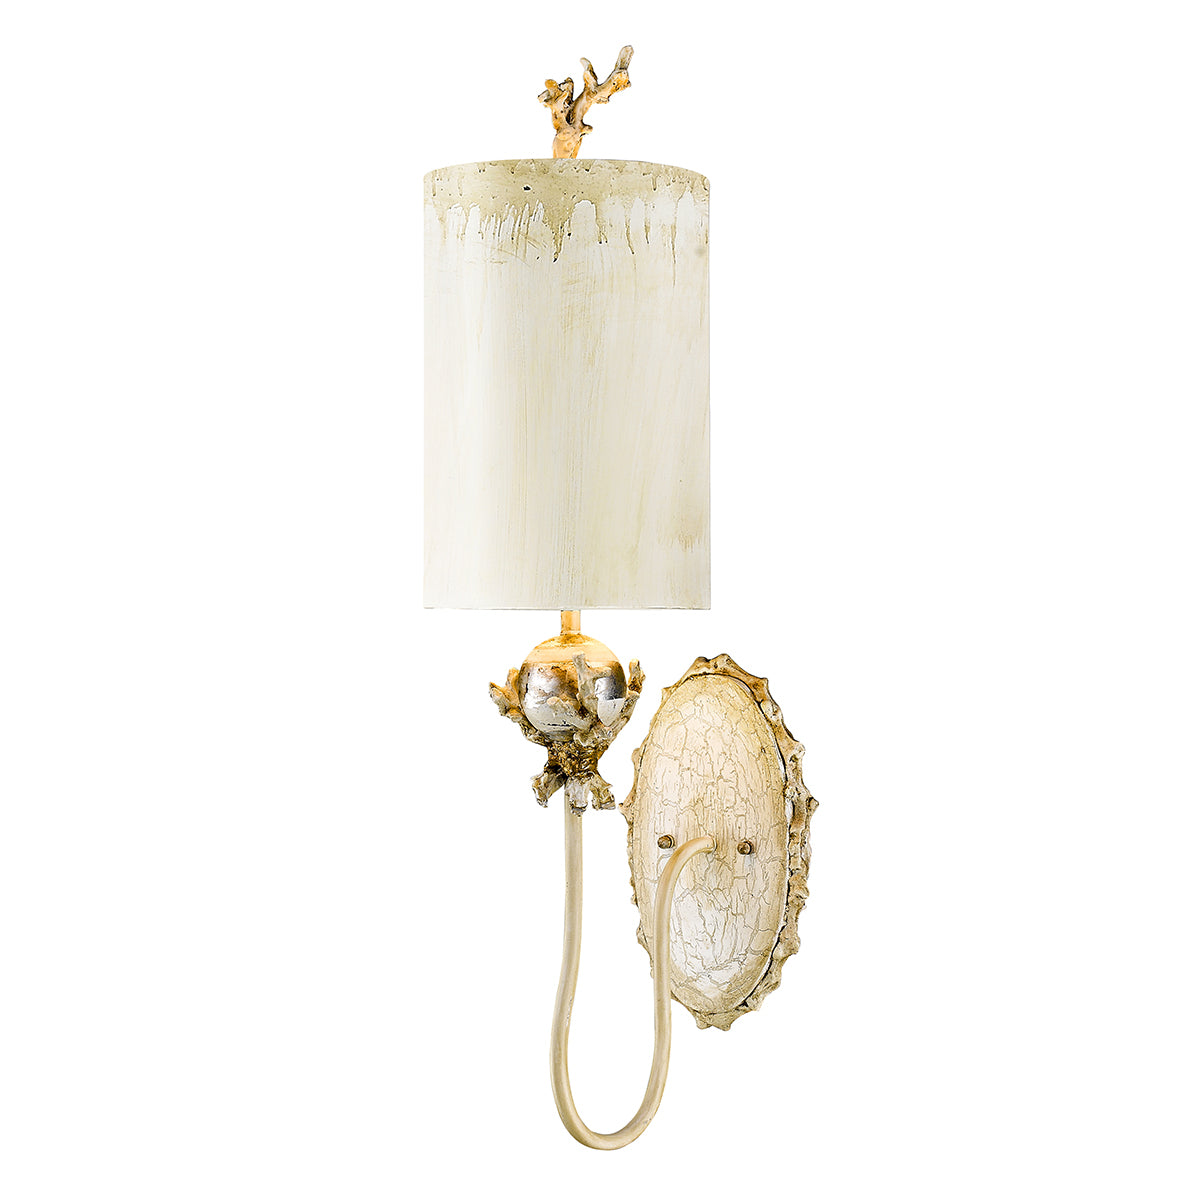 Lucas + McKearn - SC1238 - One Light Wall Sconce - Trellis - Putty Patina and Silver Leaf